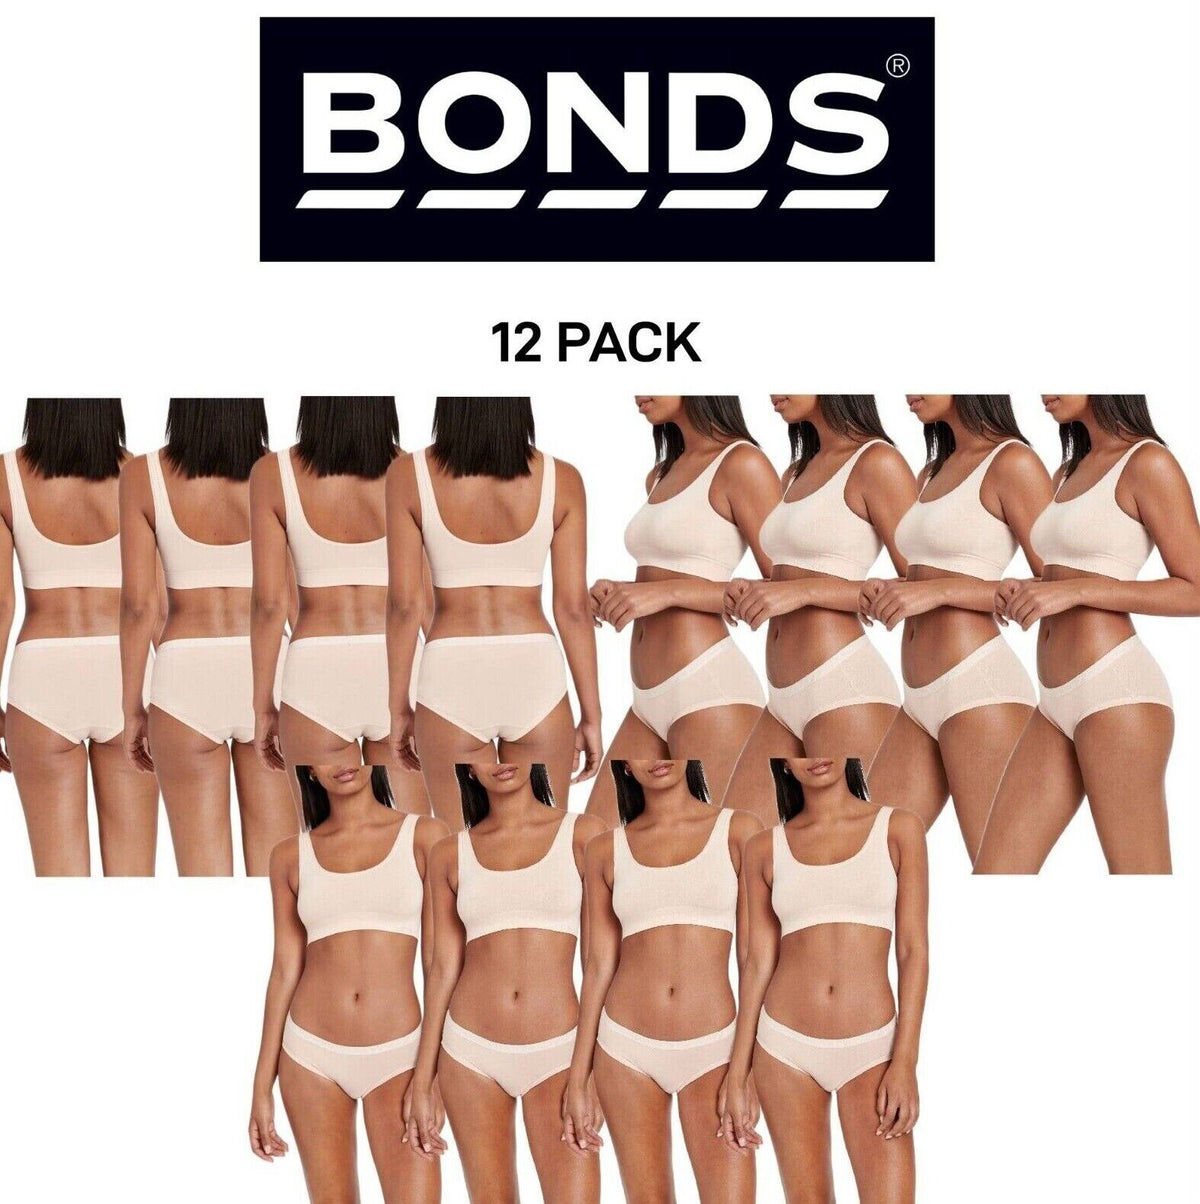 Bonds Womens Cottontails Midi Breathability and Comfort Brief 12 Pack WY5PA